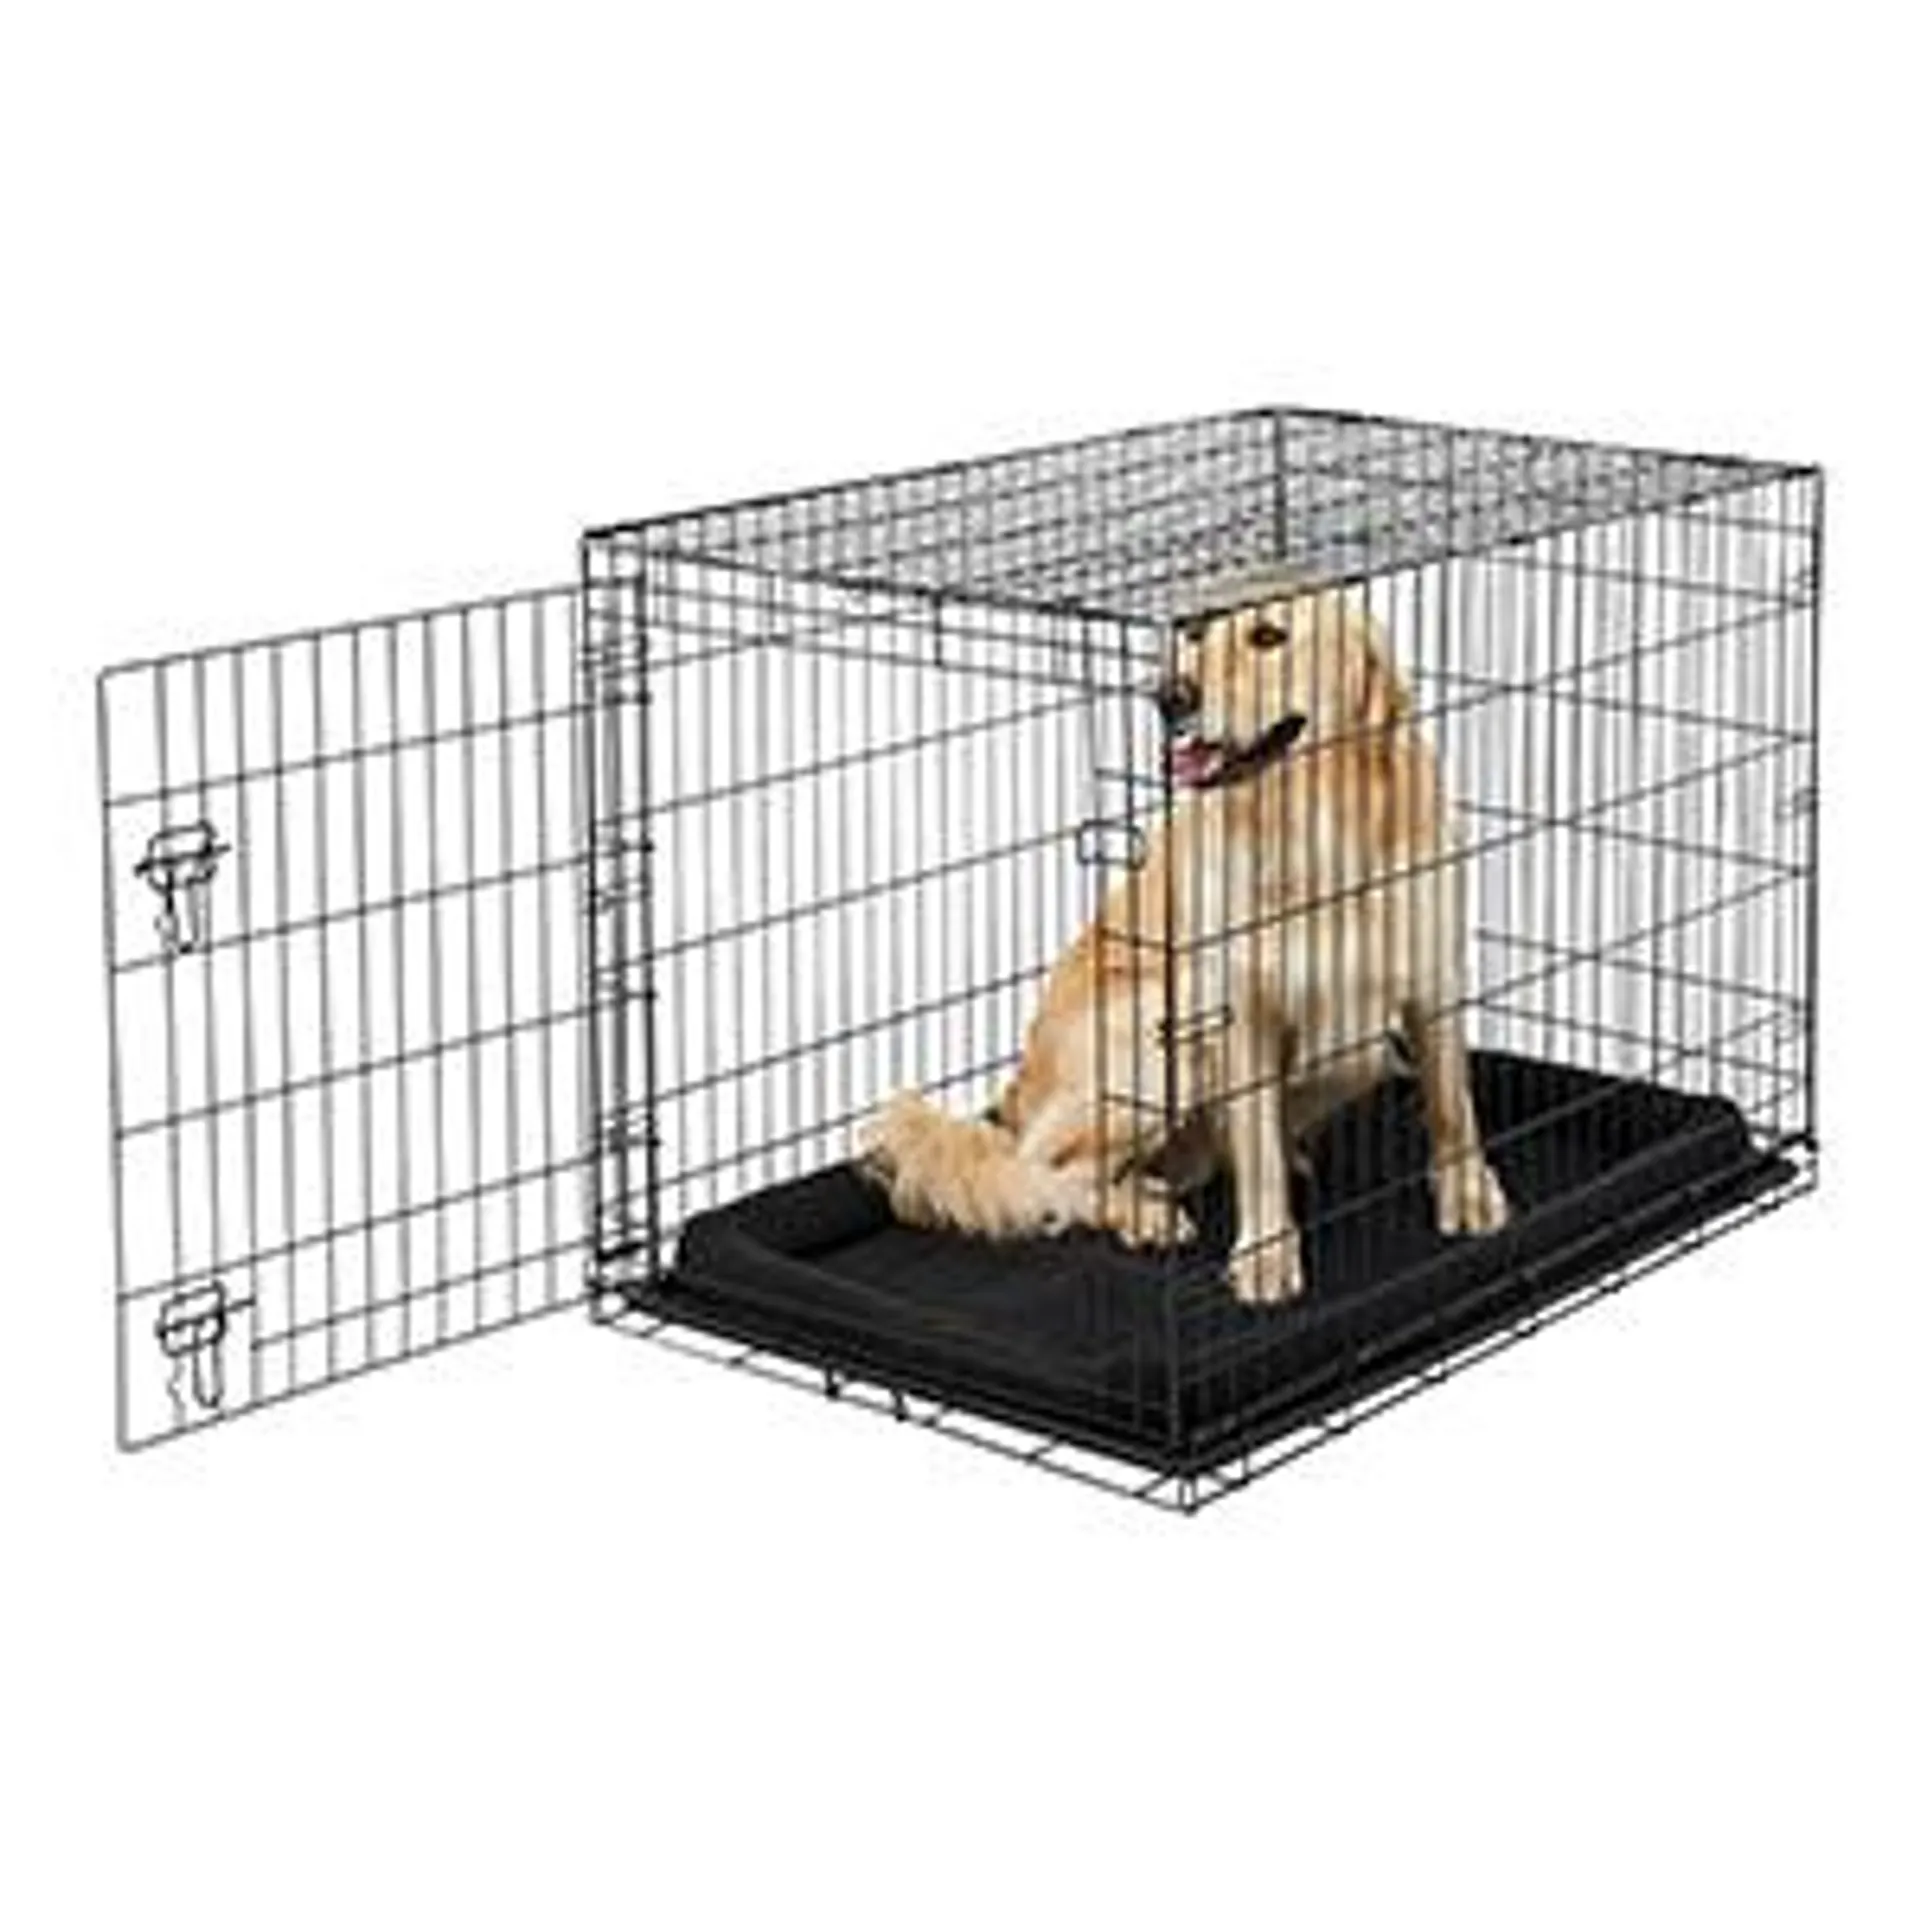 Pets at Home Single Door Dog Crate Black Large